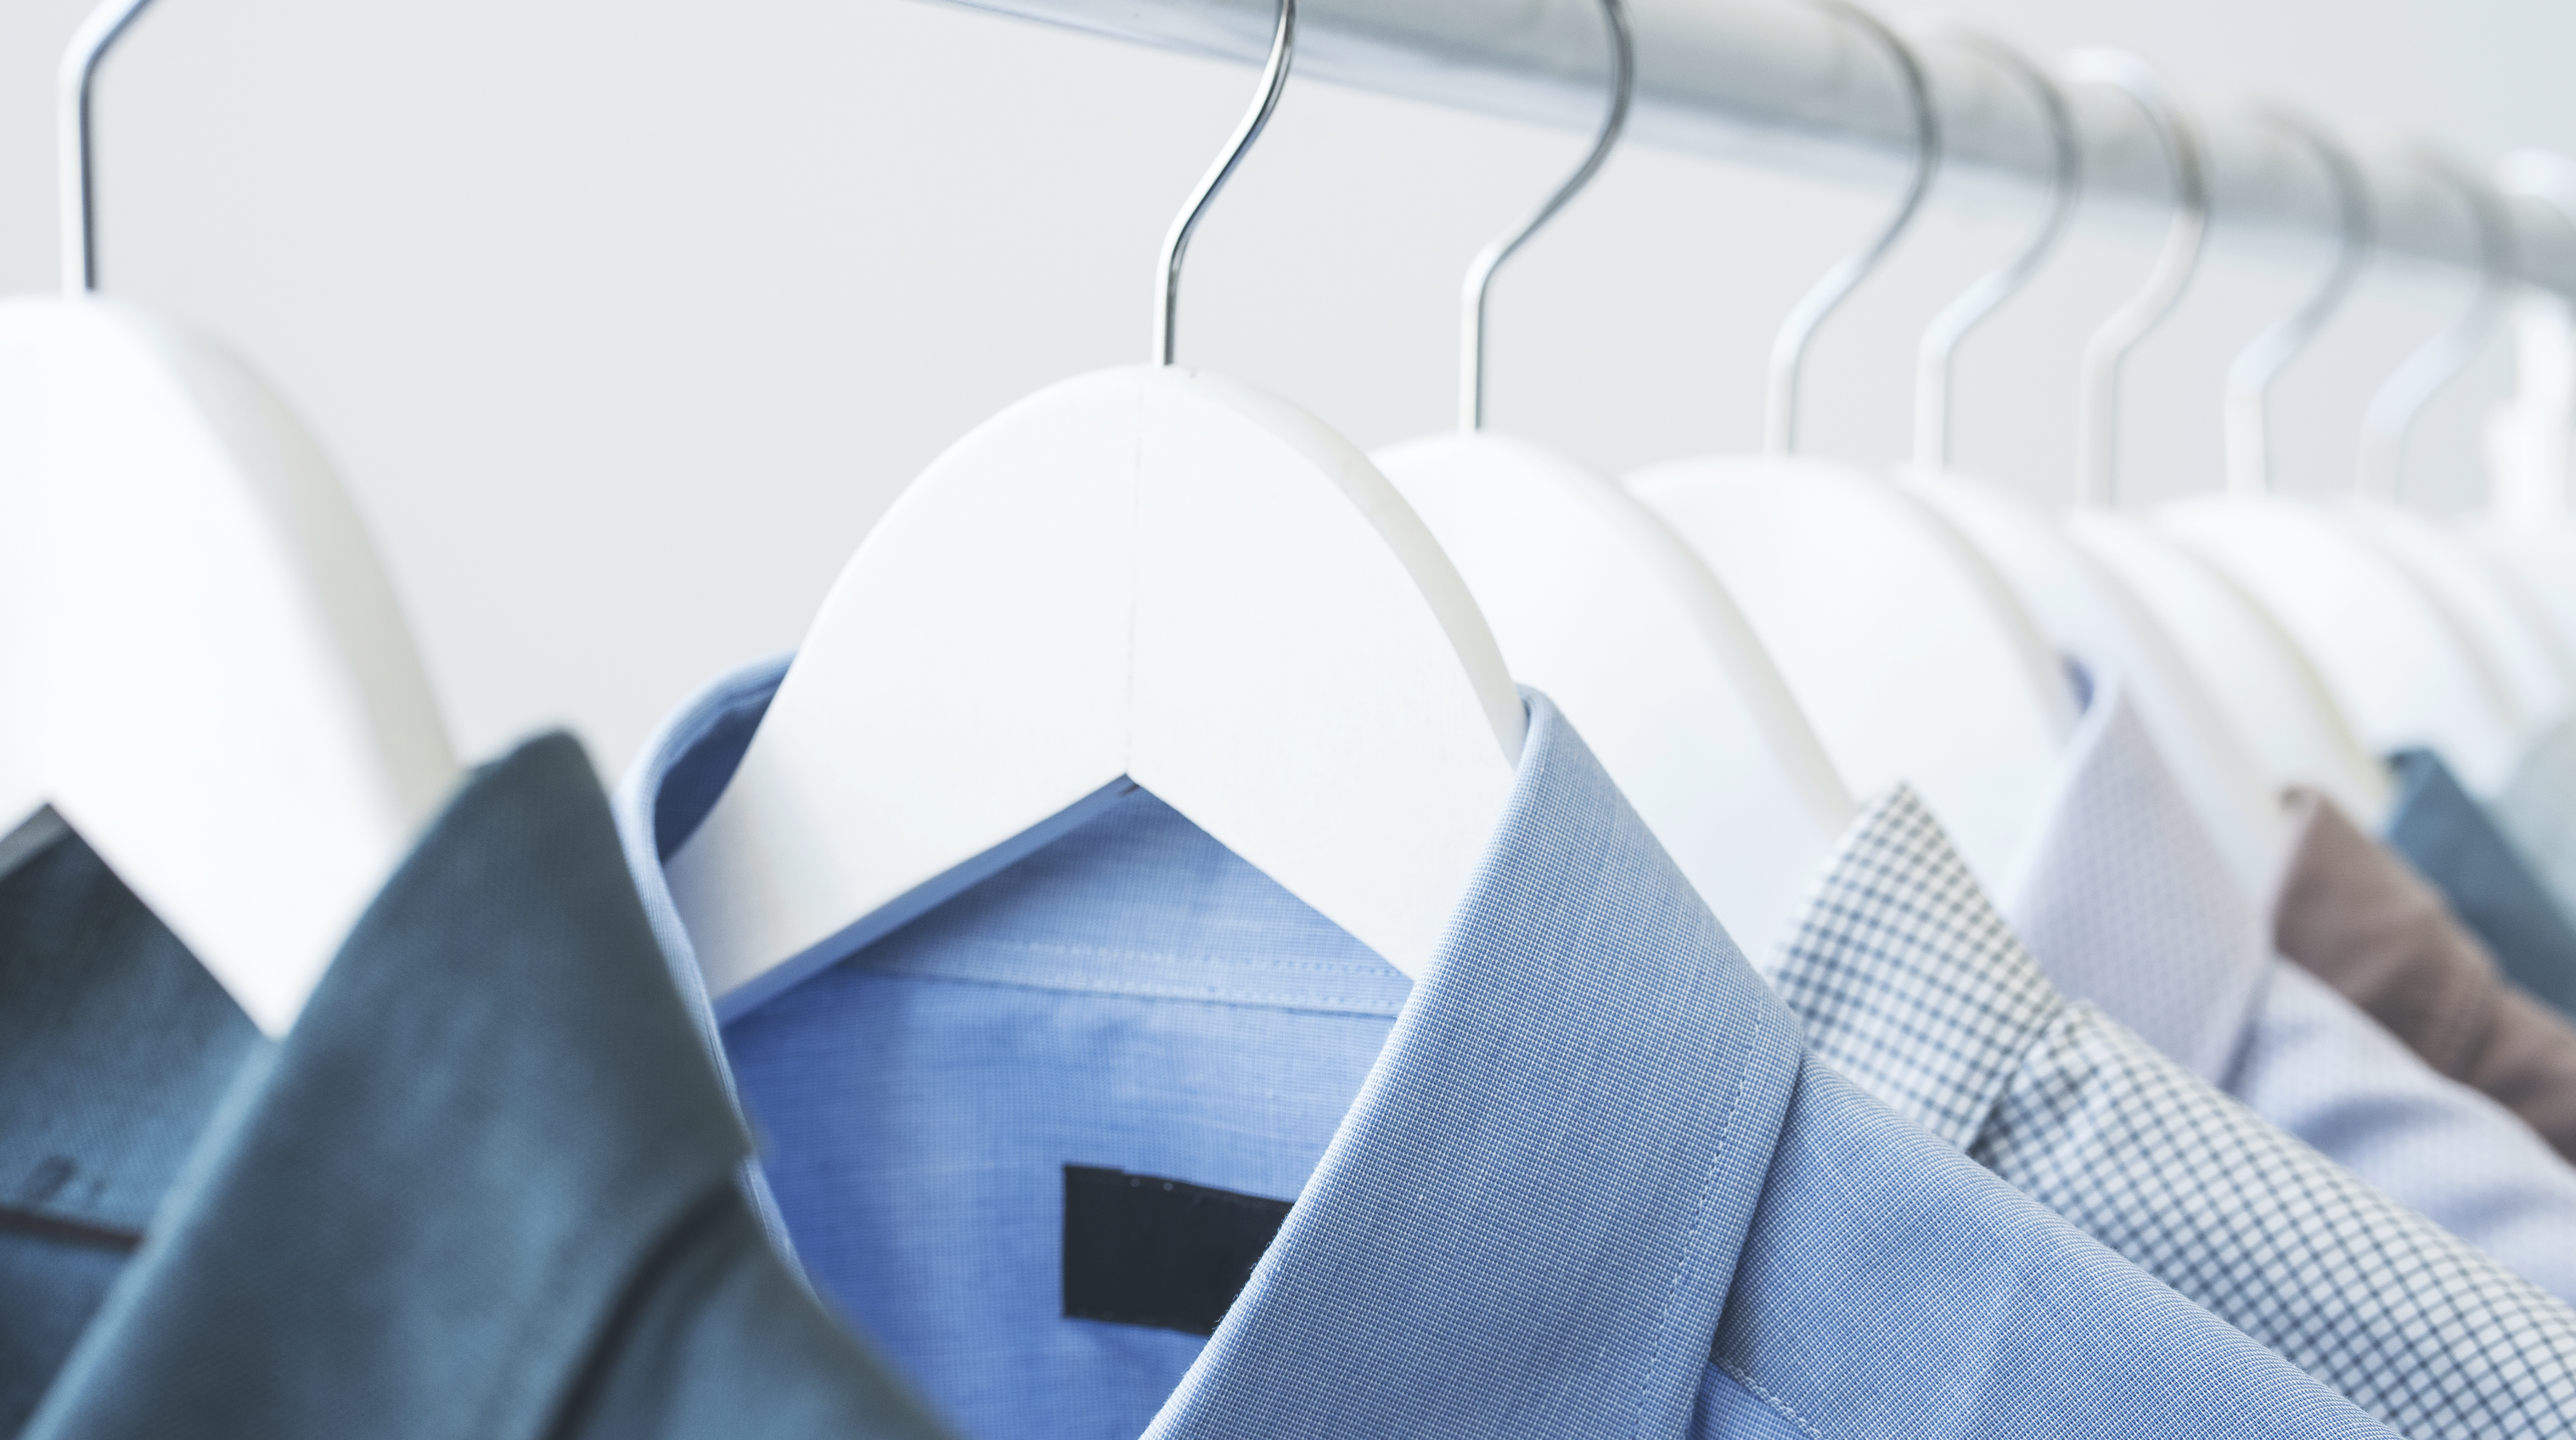 dress shirts hanging in a line